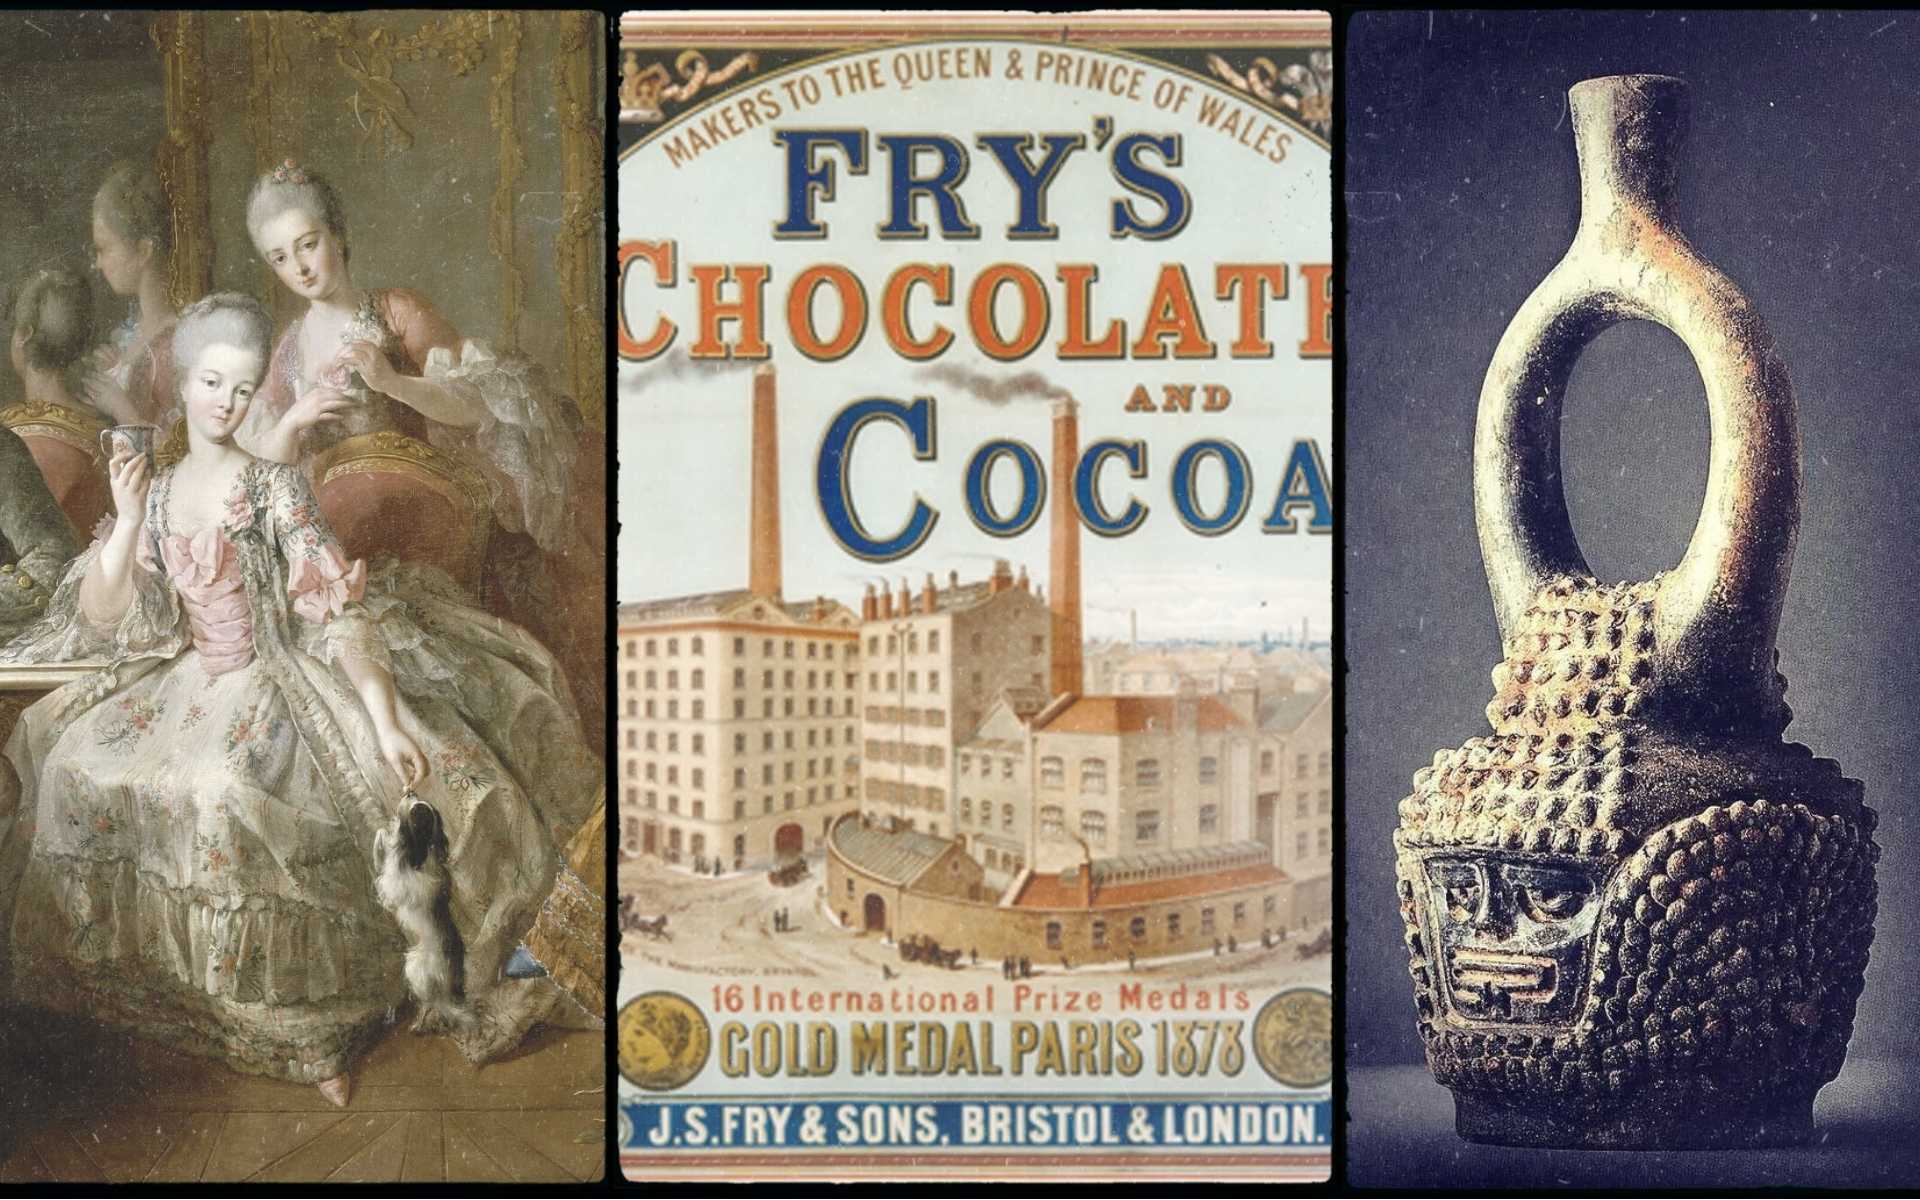 A Brief History of Chocolate - readcacao